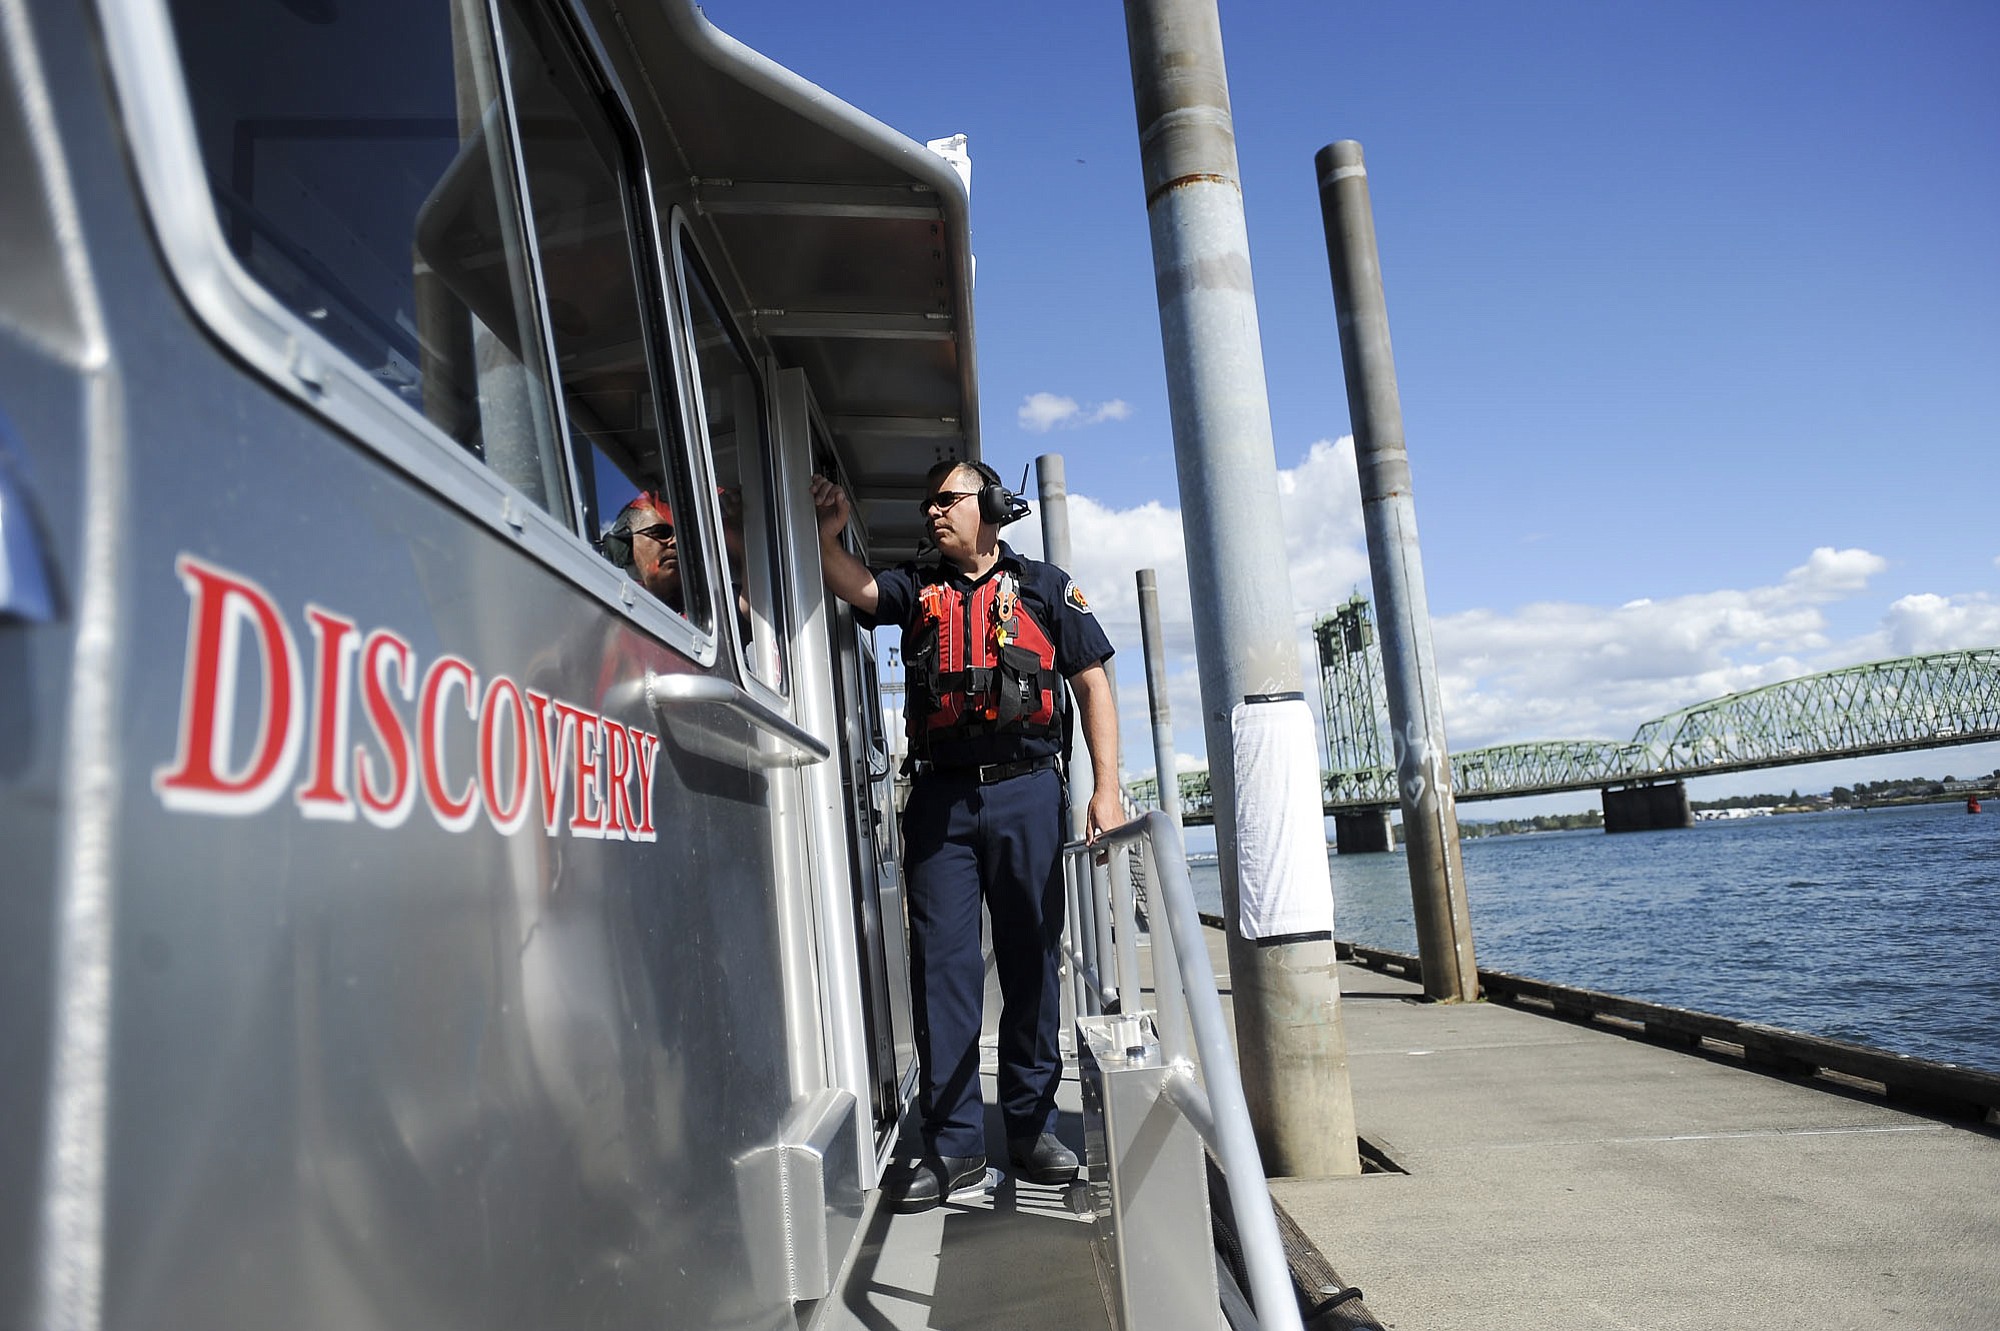 A Vancouver firefighter helps out on a tour Monday of the Columbia River along the Vancouver waterfront.